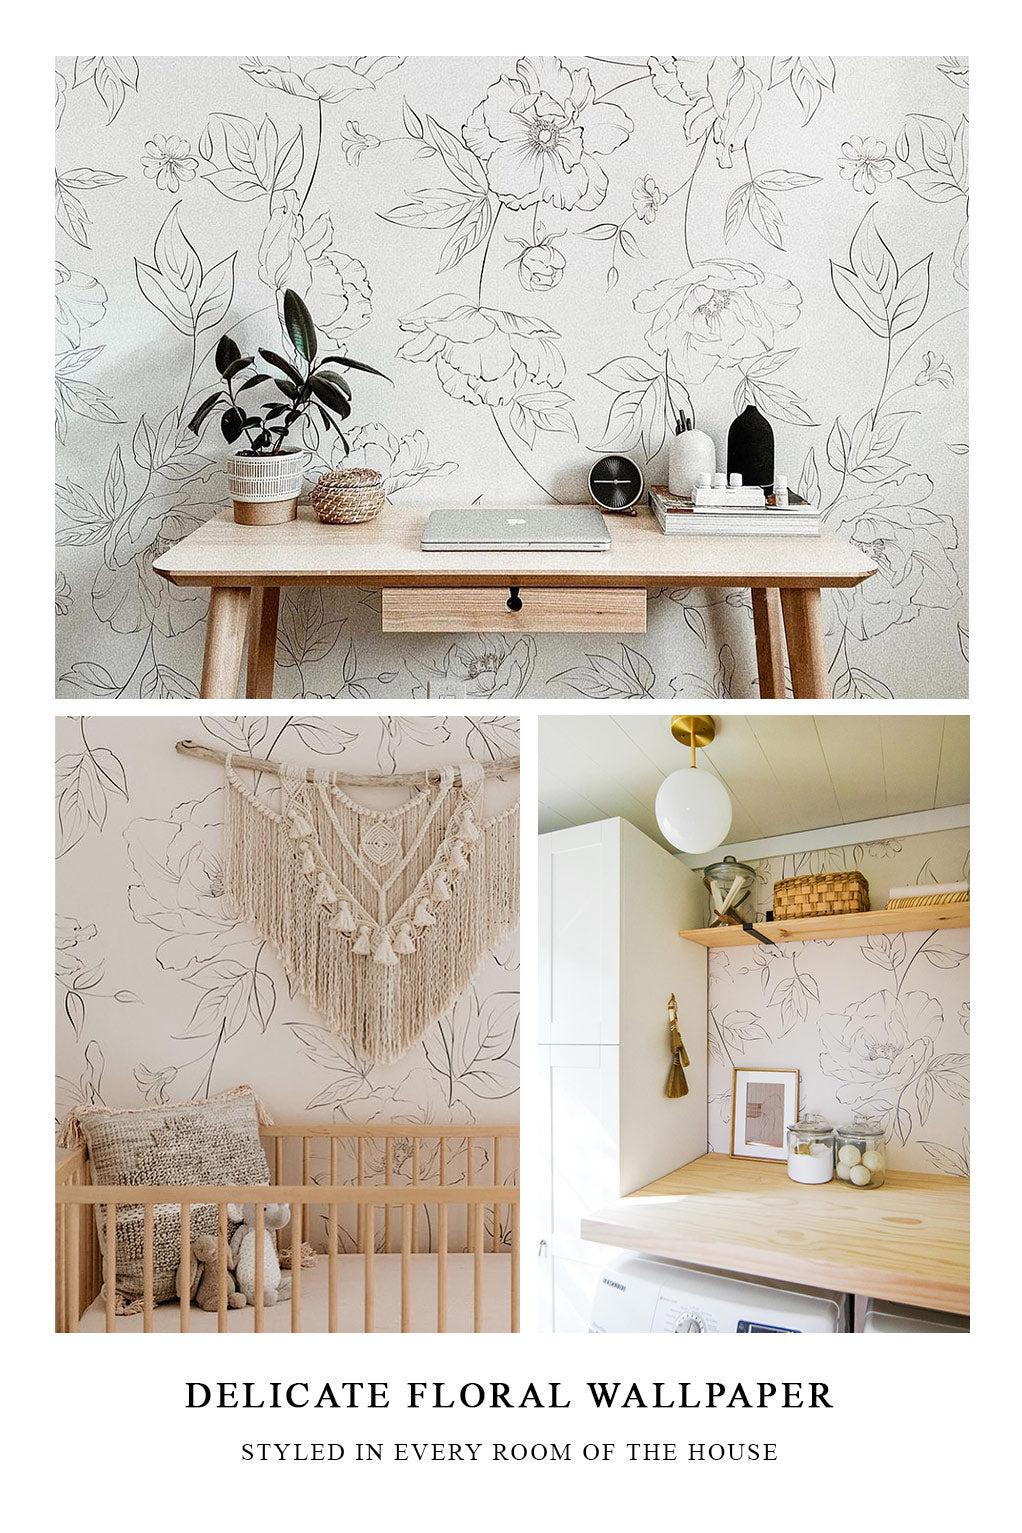 How To Style Our Delicate Floral Wallpaper In Every Room Of The